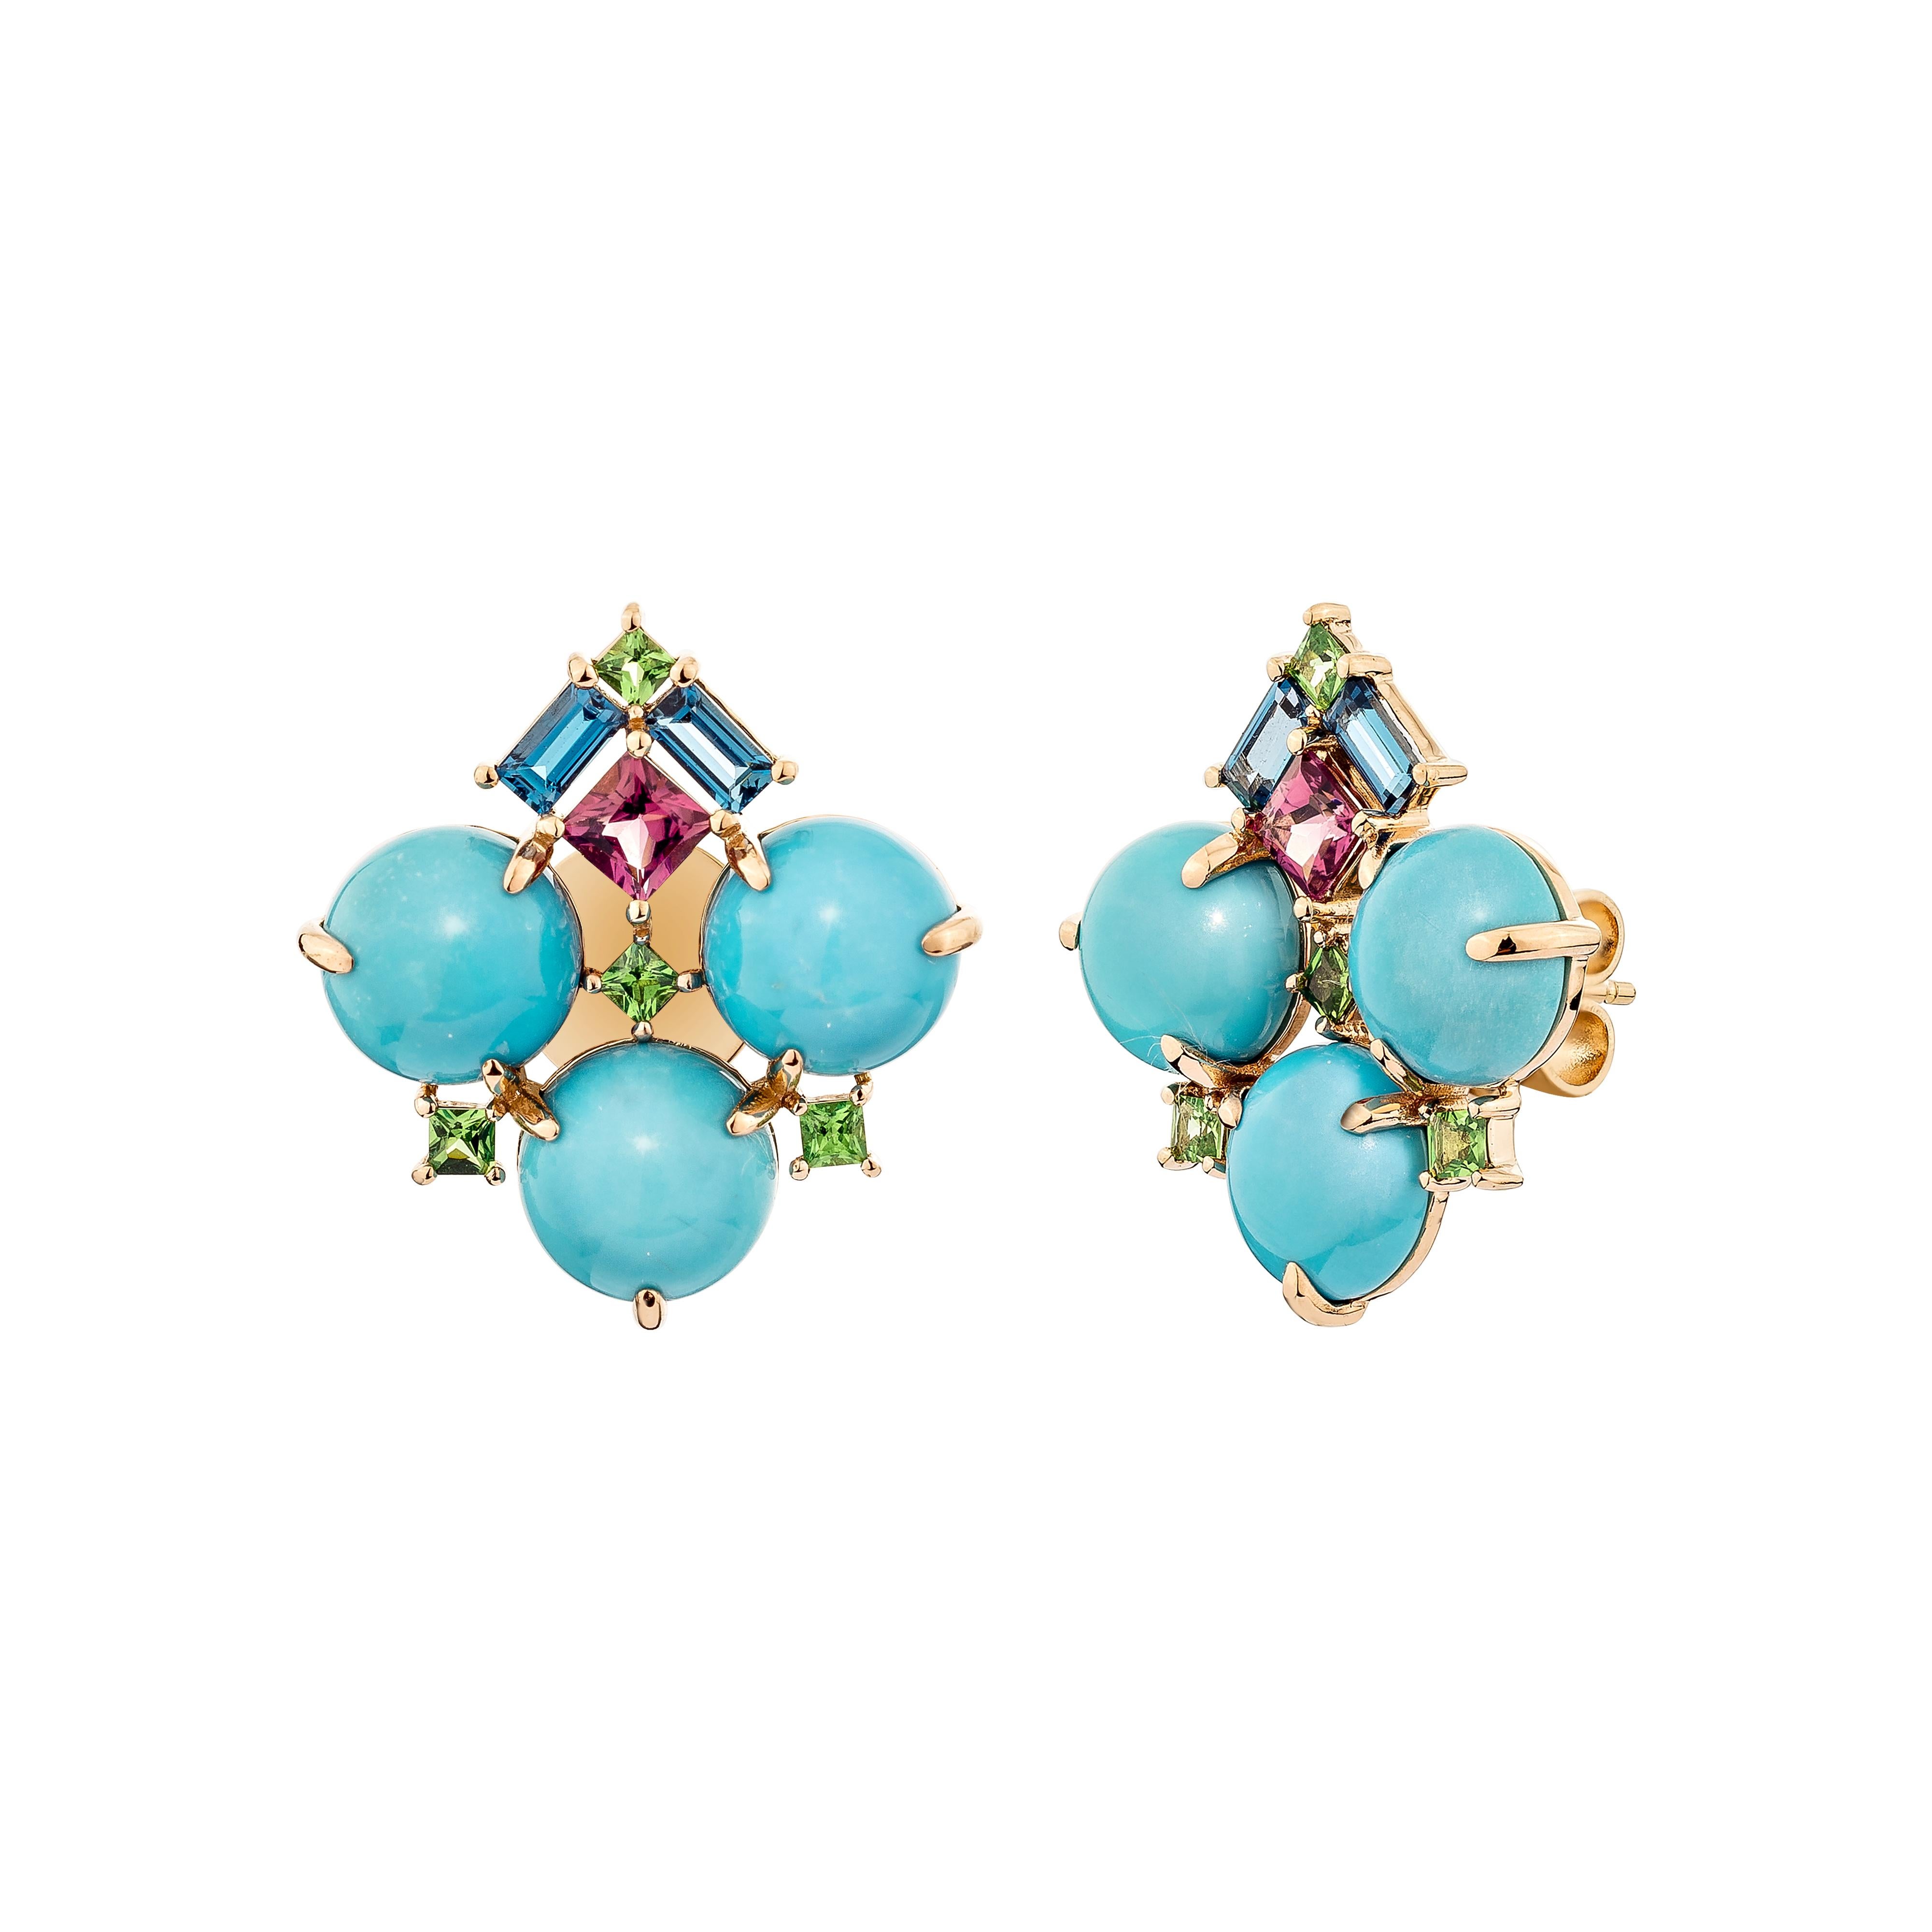 Presents a Turquoise earring in a round briolette cuts. These earrings exemplify the style and elegance that modern women wish to display. Crafted in rose gold these stud earrings are accented with Pink Tourmaline, London Blue Topaz and